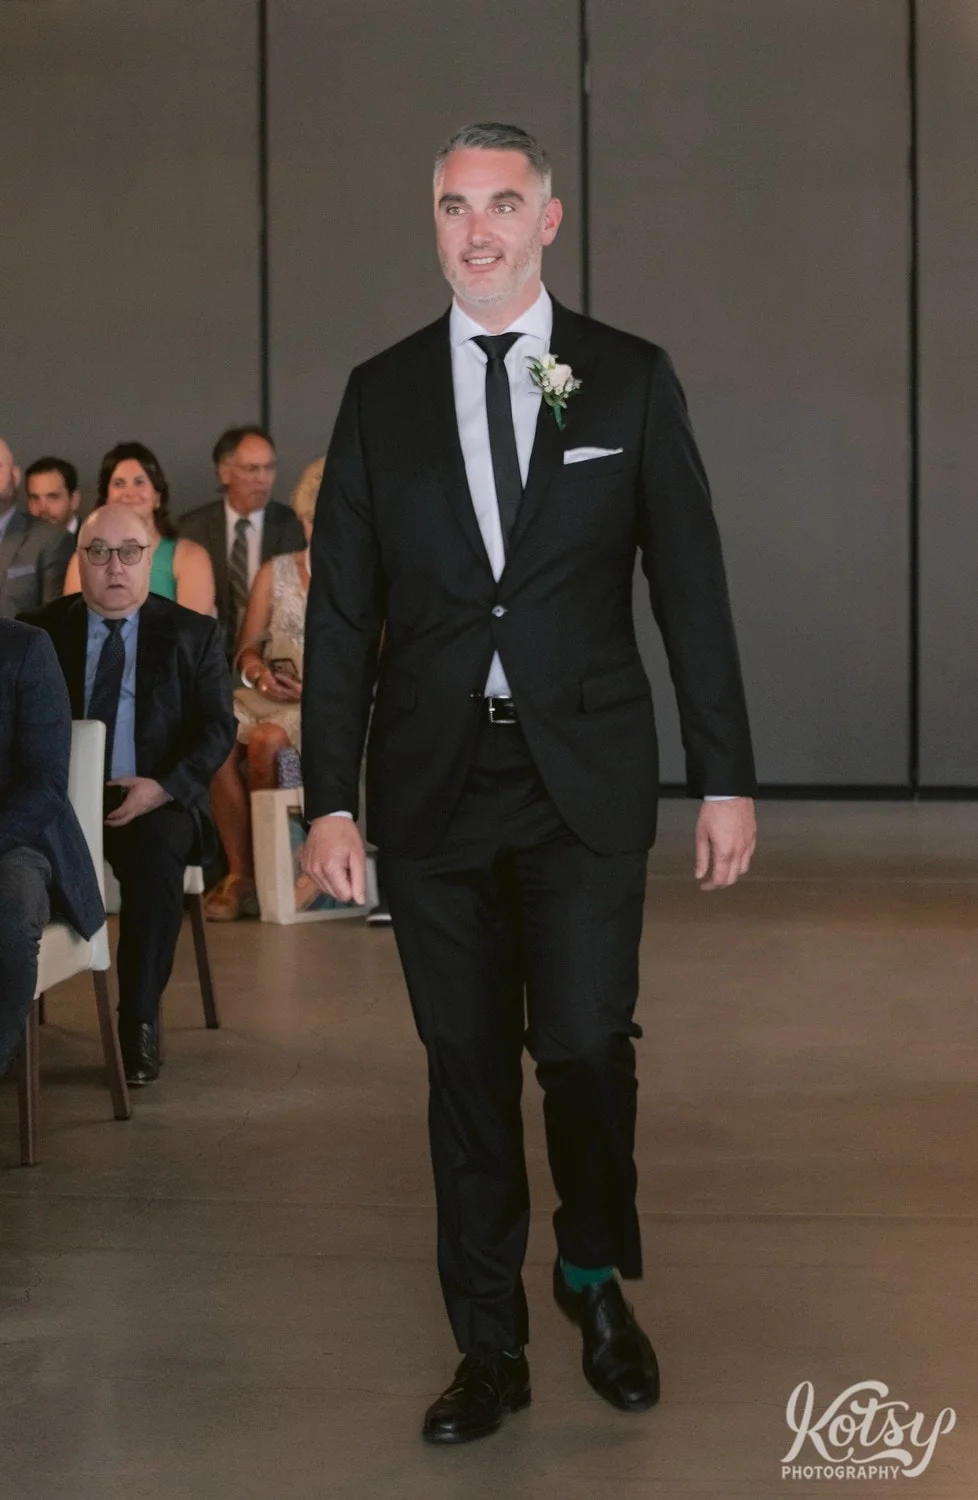 A full body shot of a best man walking down the aisle during a Village Loft wedding ceremony in Toronto, Canada